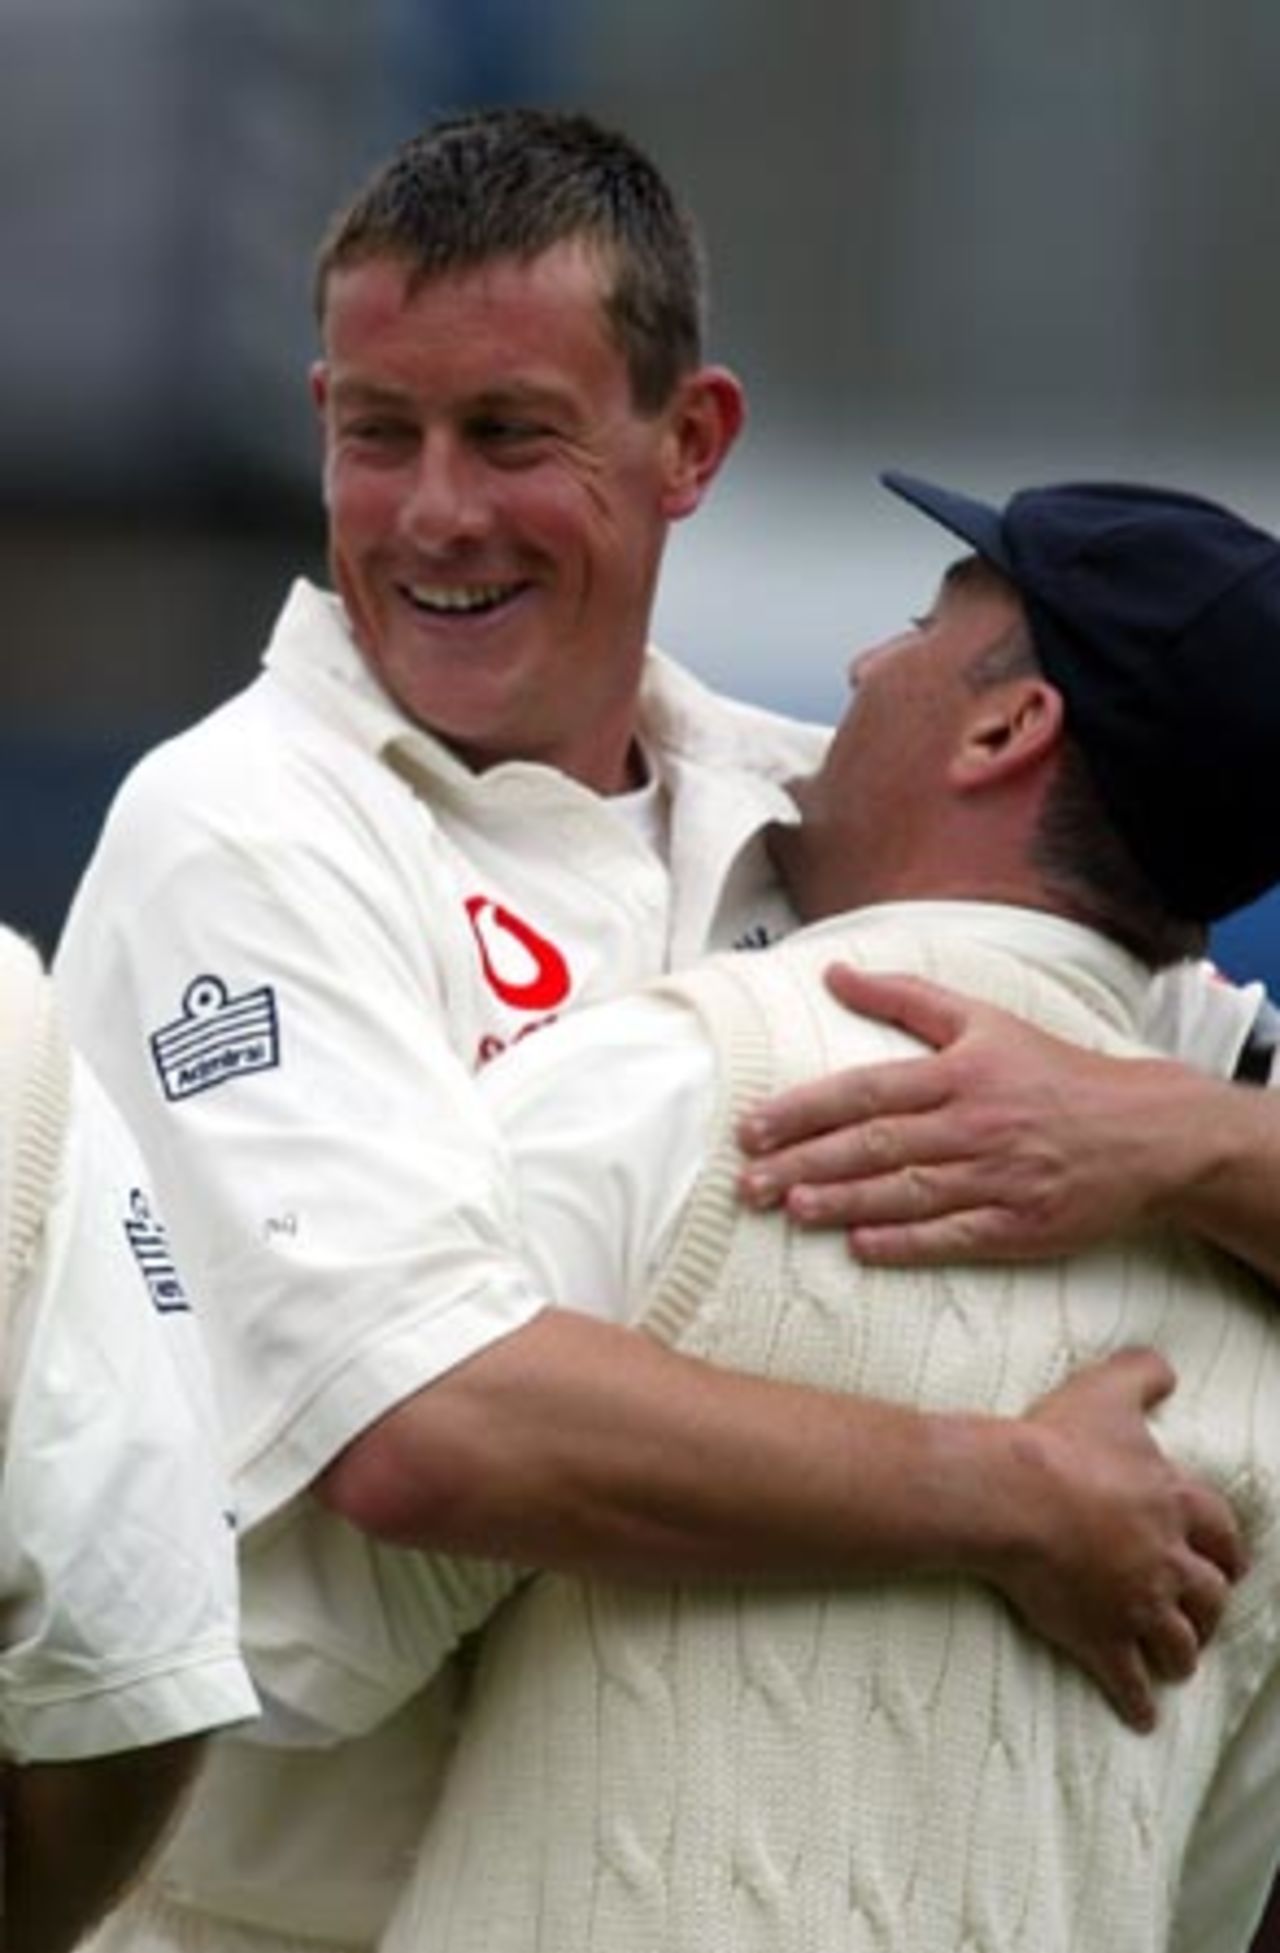 England bowler Ashley Giles (left) hugs fielder Graham Thorpe after the dismissal of New Zealand batsman Mark Richardson, caught by Thorpe for four in his second innings. 2nd Test: New Zealand v England at Basin Reserve, Wellington, 21-25 March 2002 (25 March 2002).